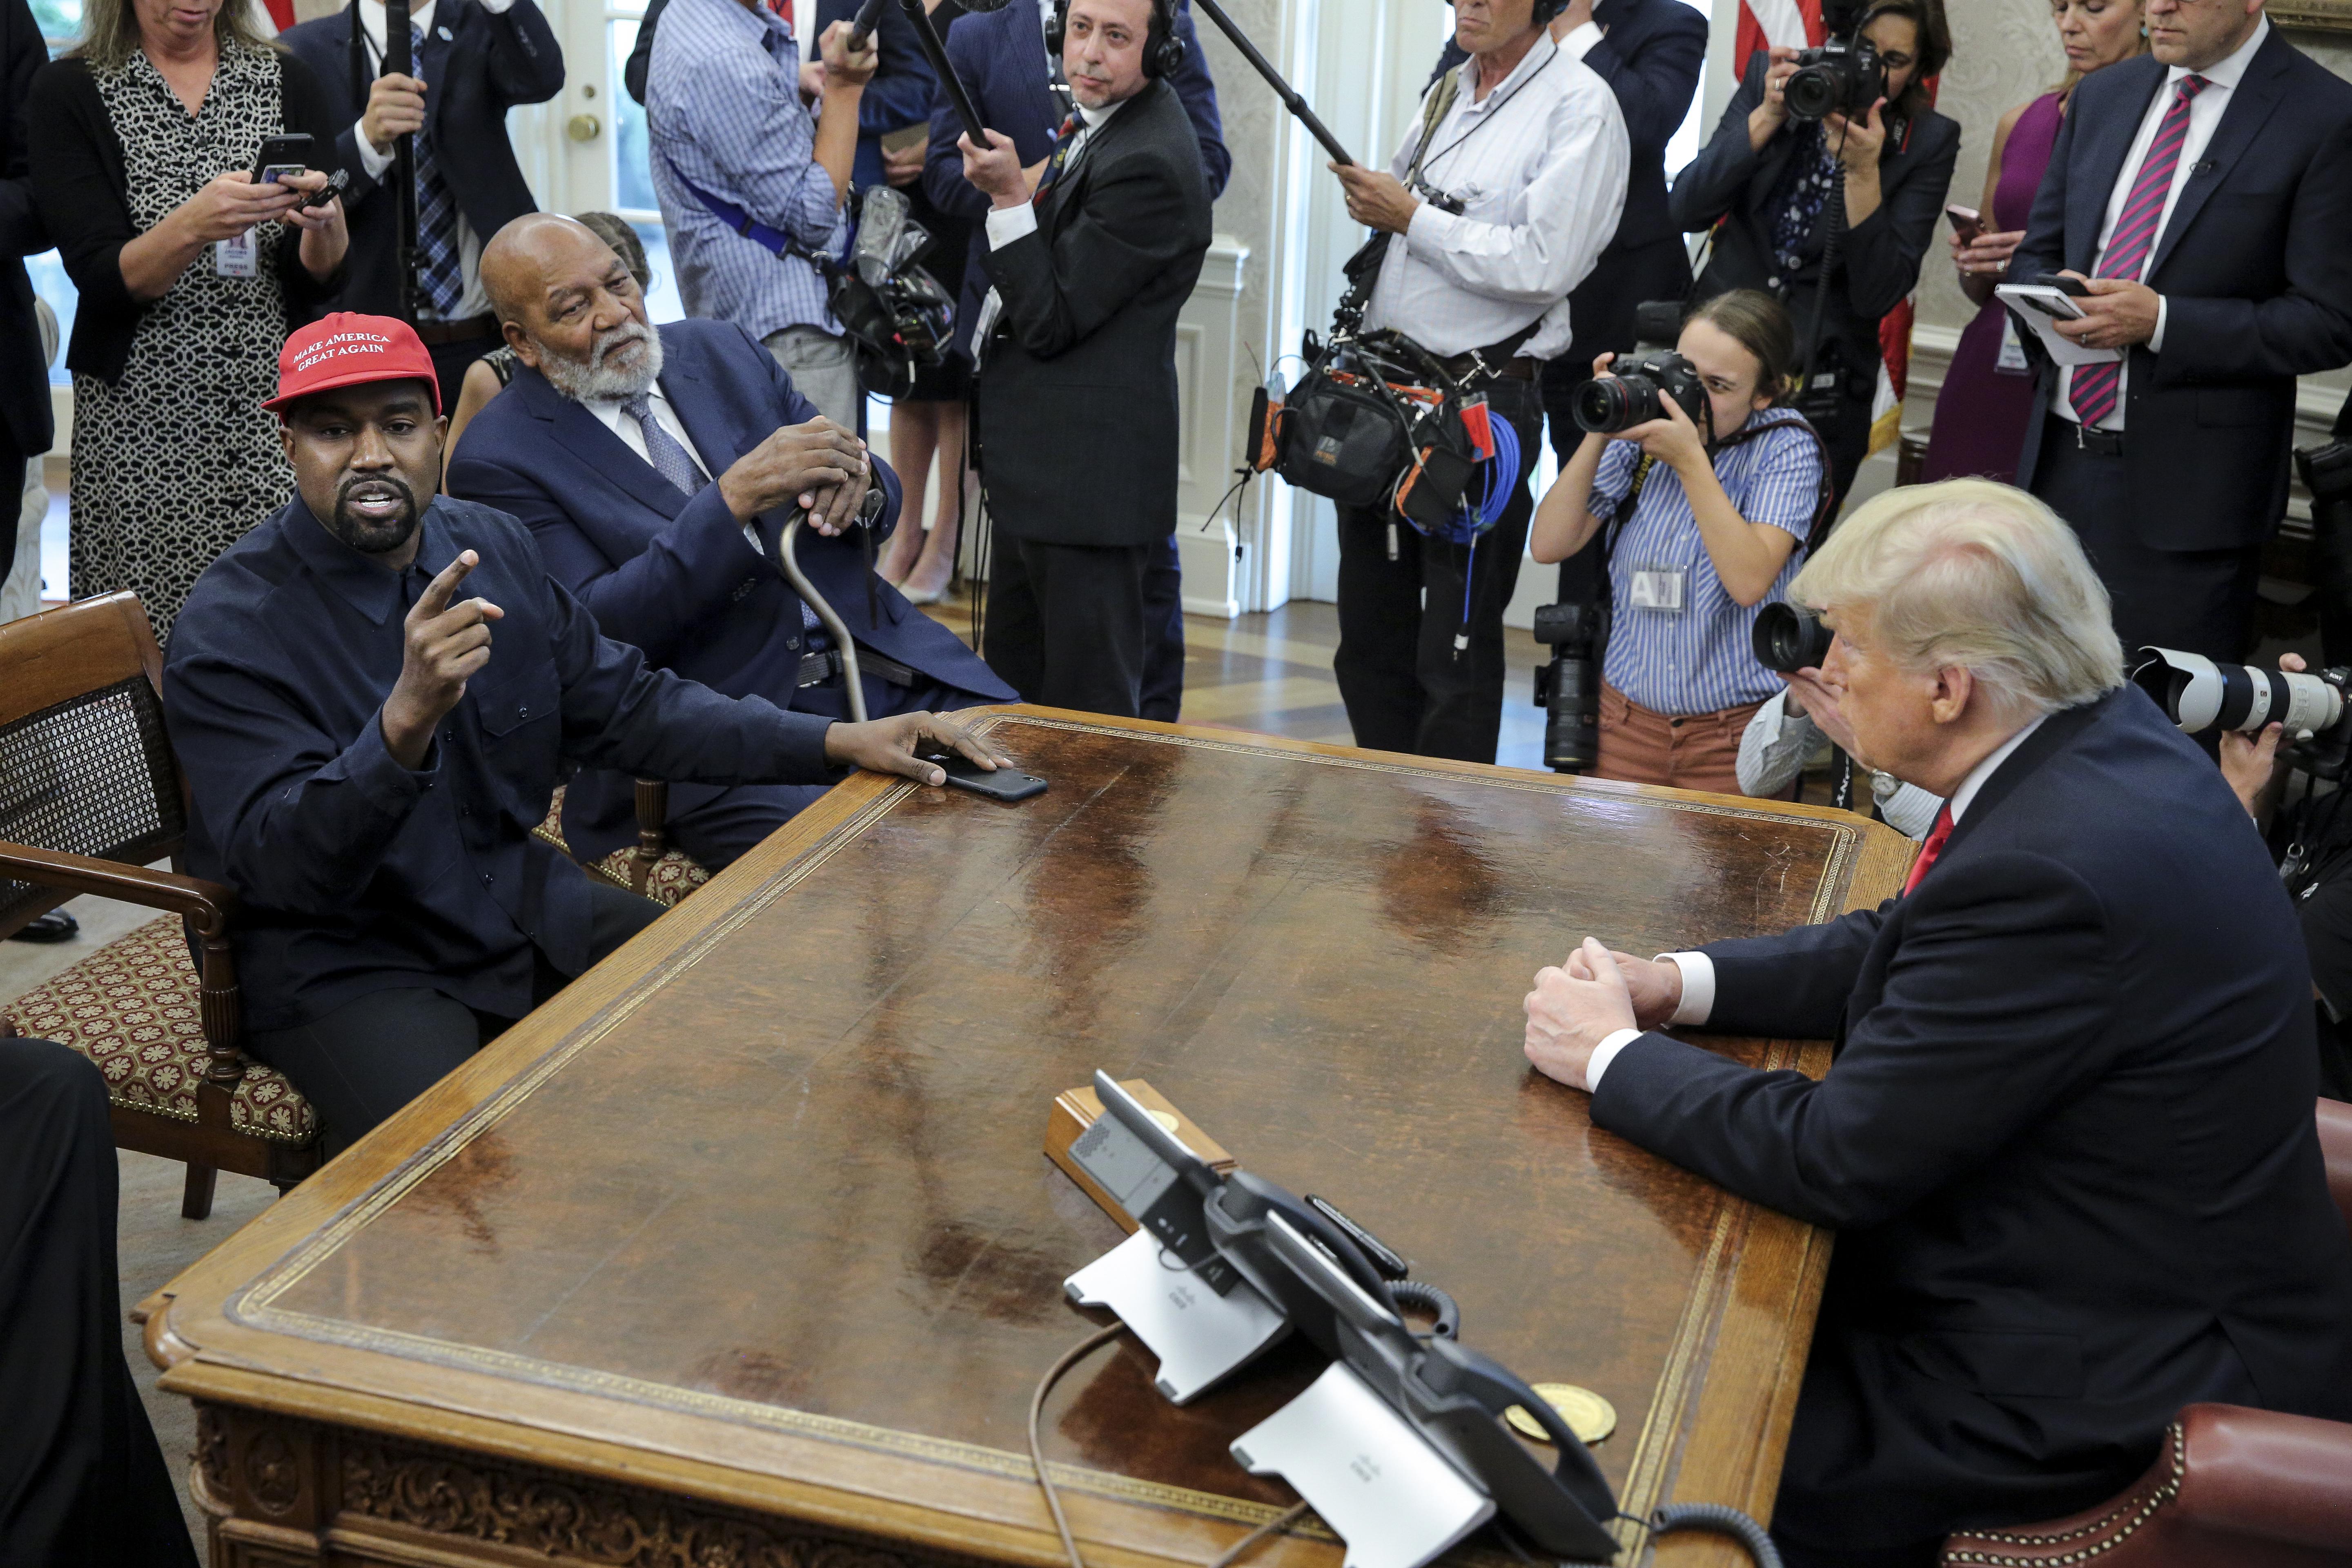 Kanye West and Donald Trump in the Oval Office.